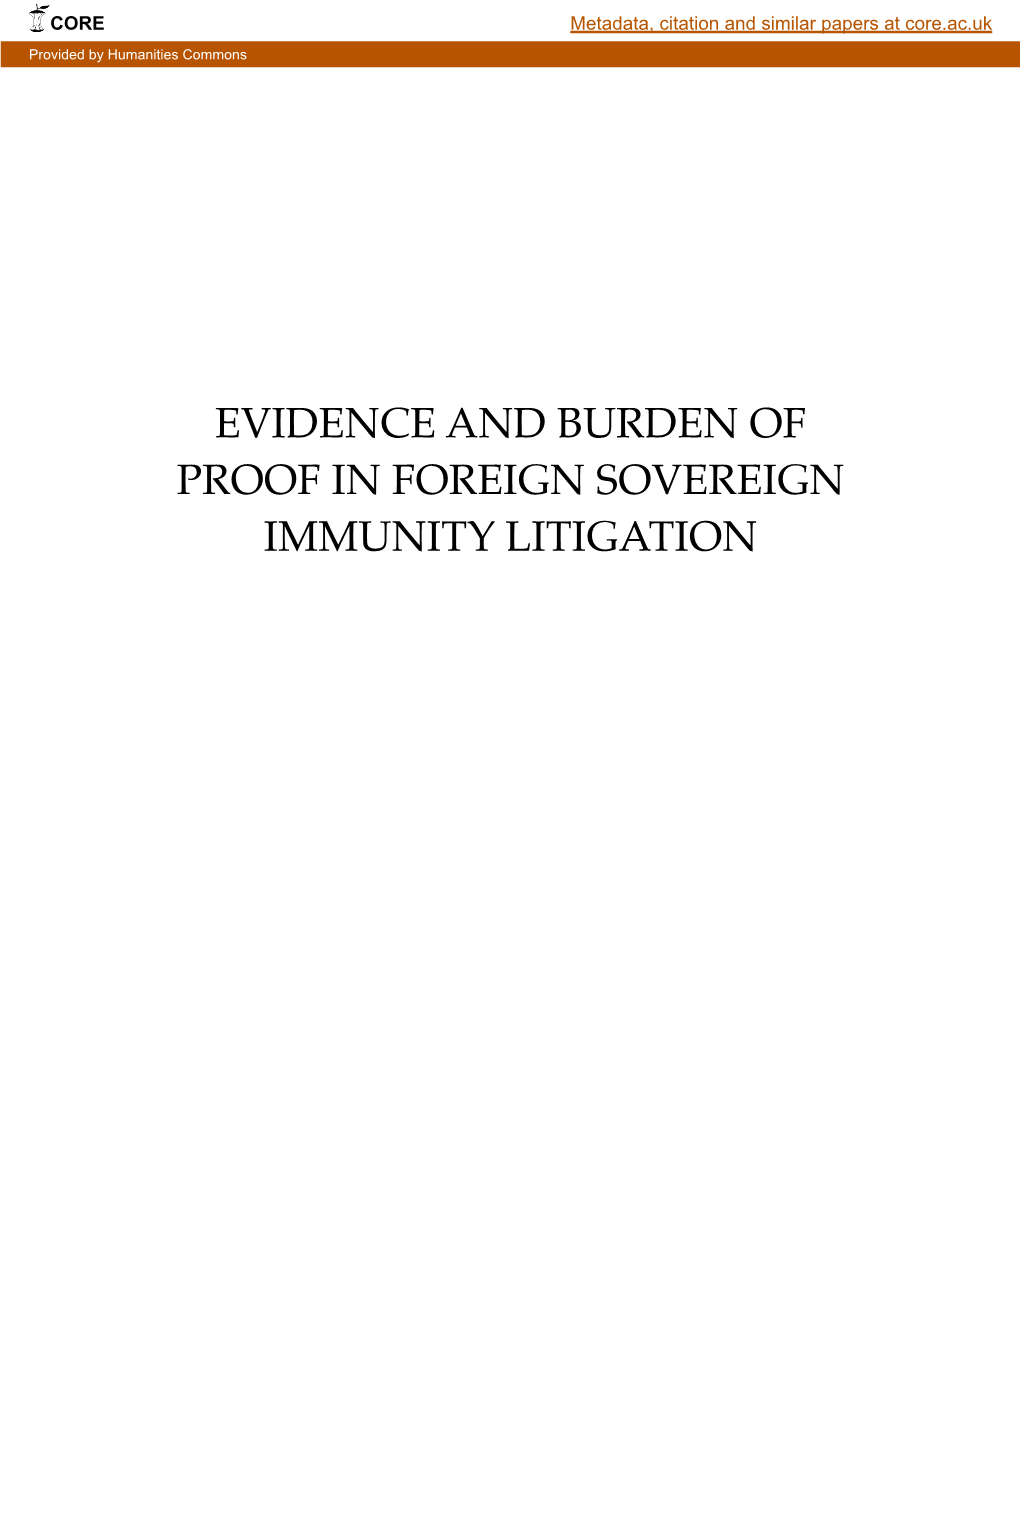 Evidence and Burden of Proof in Foreign Sovereign Immunity Litigation Books by Peter Fritz Walter